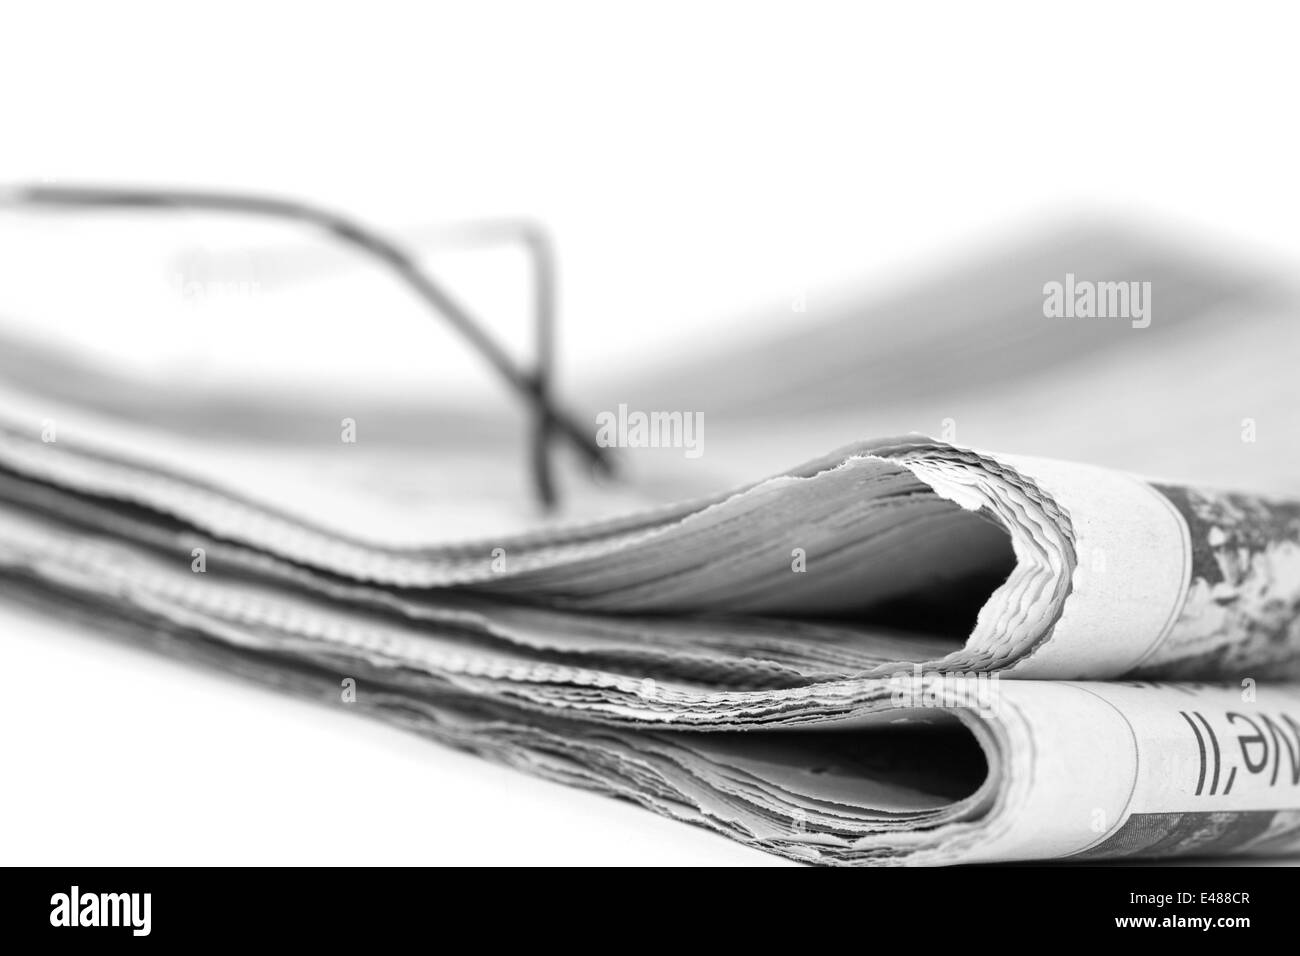 Newspaper  folded up on a white background Stock Photo